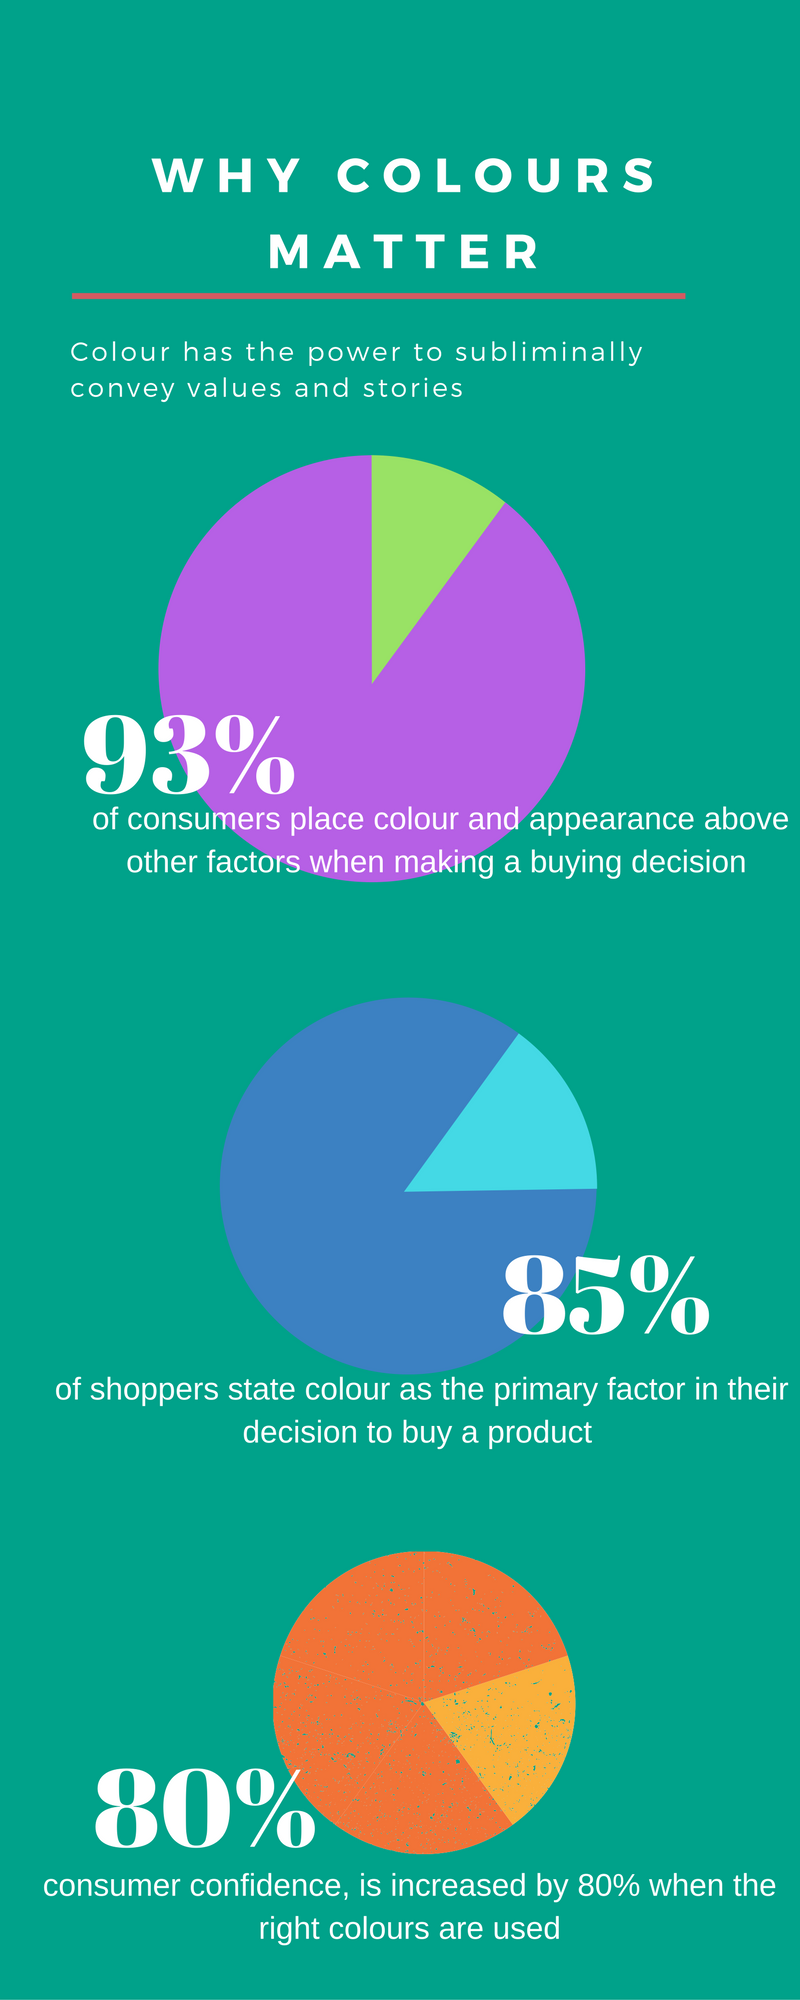 Importance of Colour to consumers